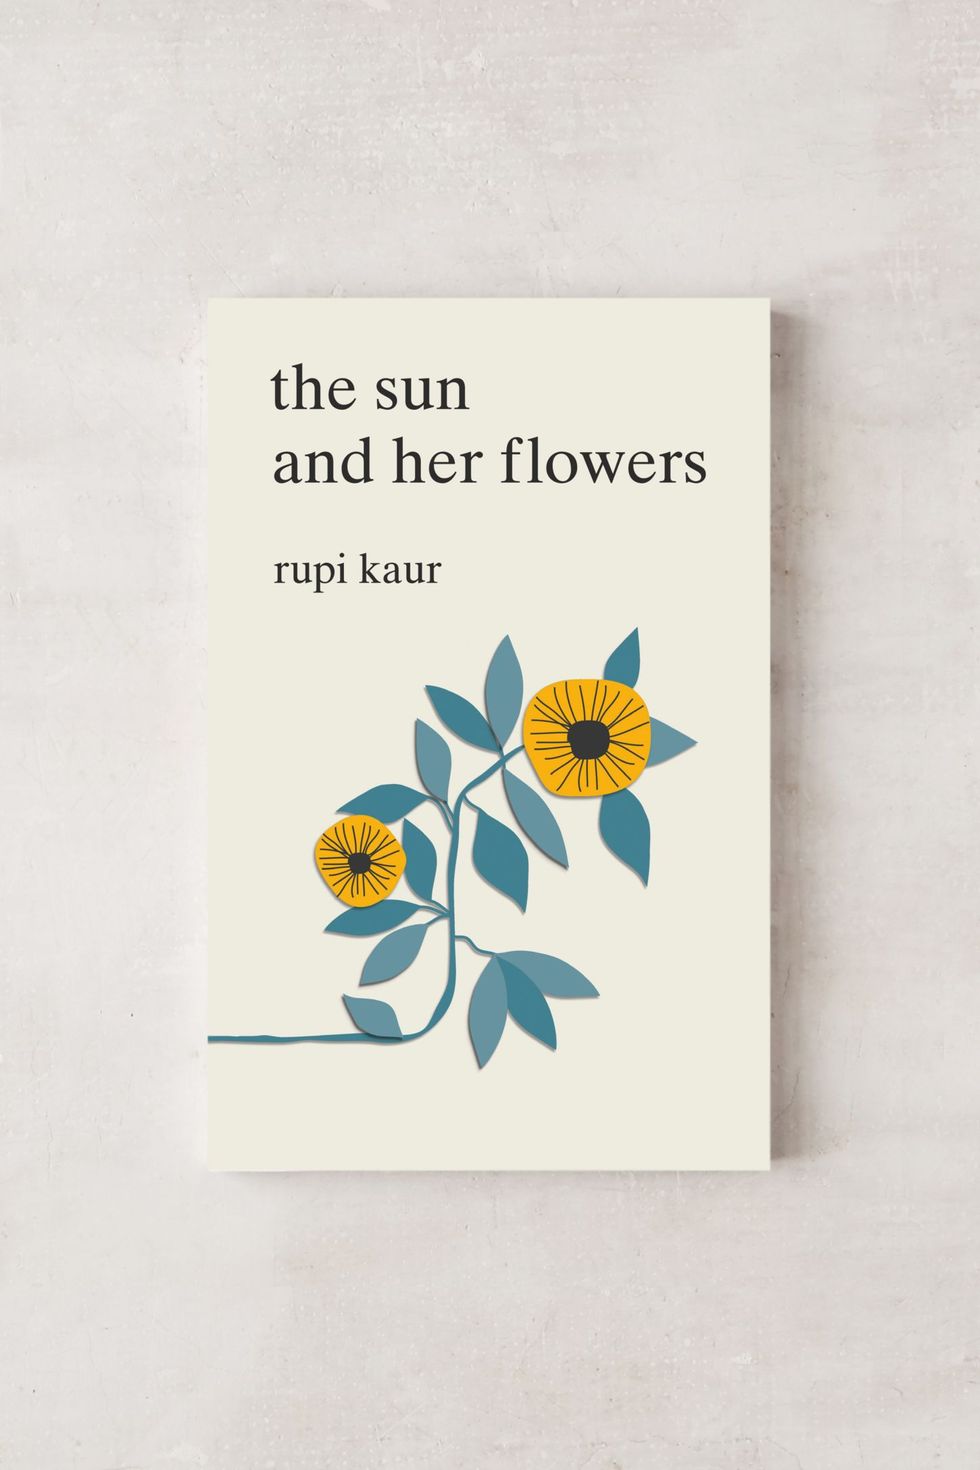 "the sun and her flowers" by Rupi Kaur Best Poems